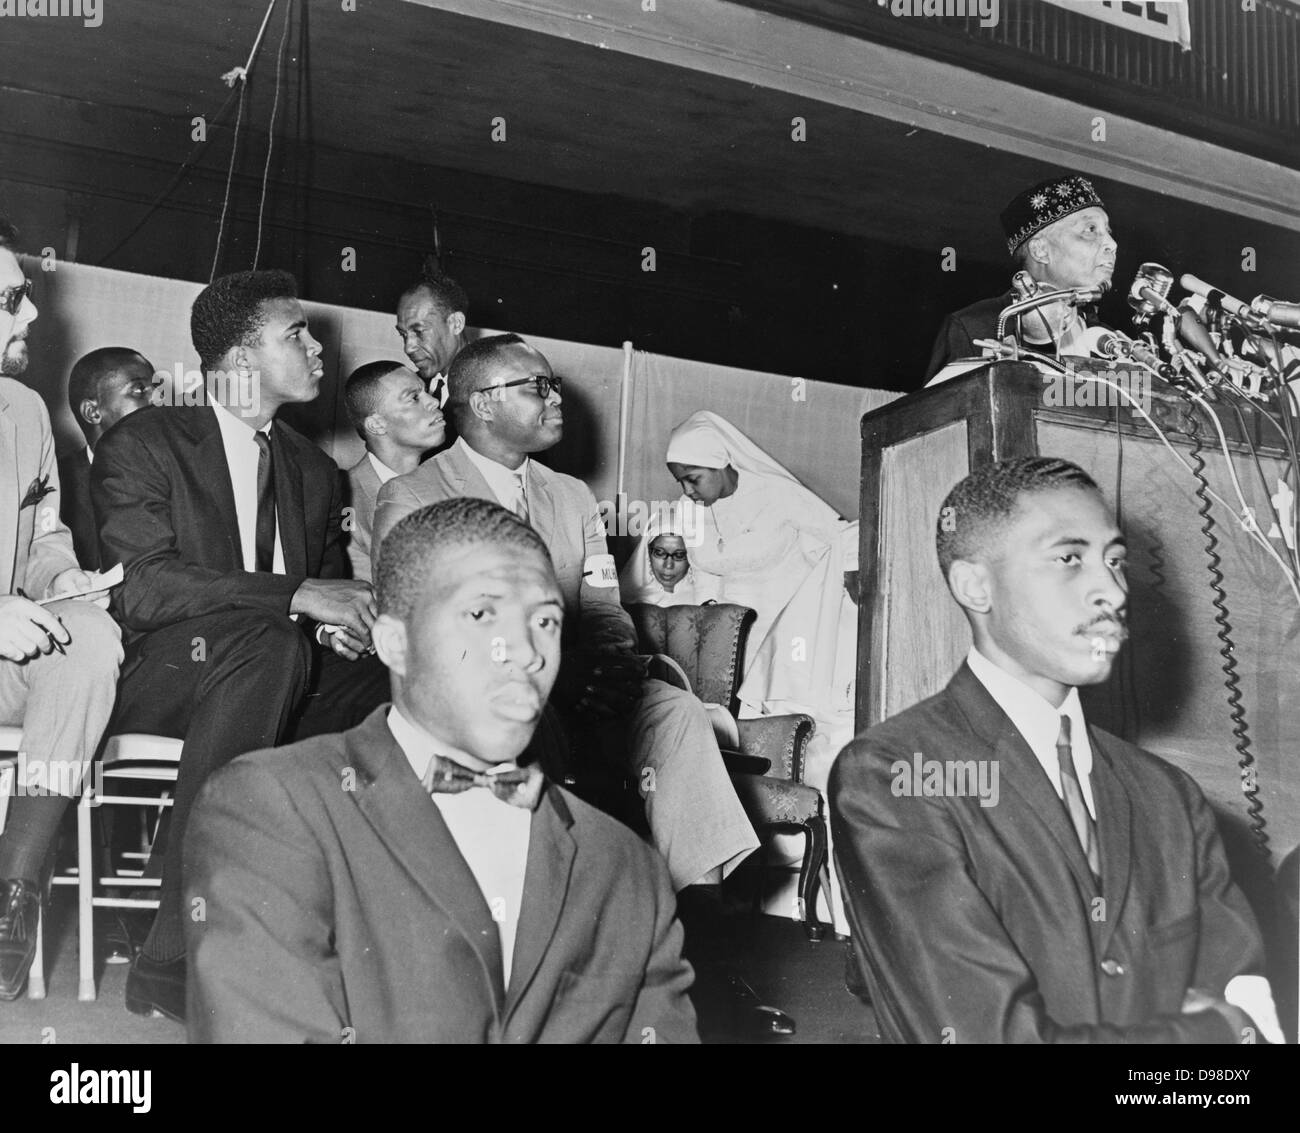 Elijah Muhammad (1897-1975, born Elijah Poole). Converted to Islam in 1931, from 1934 until his death be was leader of the Nation of Islam. Here in 1964 addressing followers including Cassius Clay (Muhammad Ali). Stock Photo